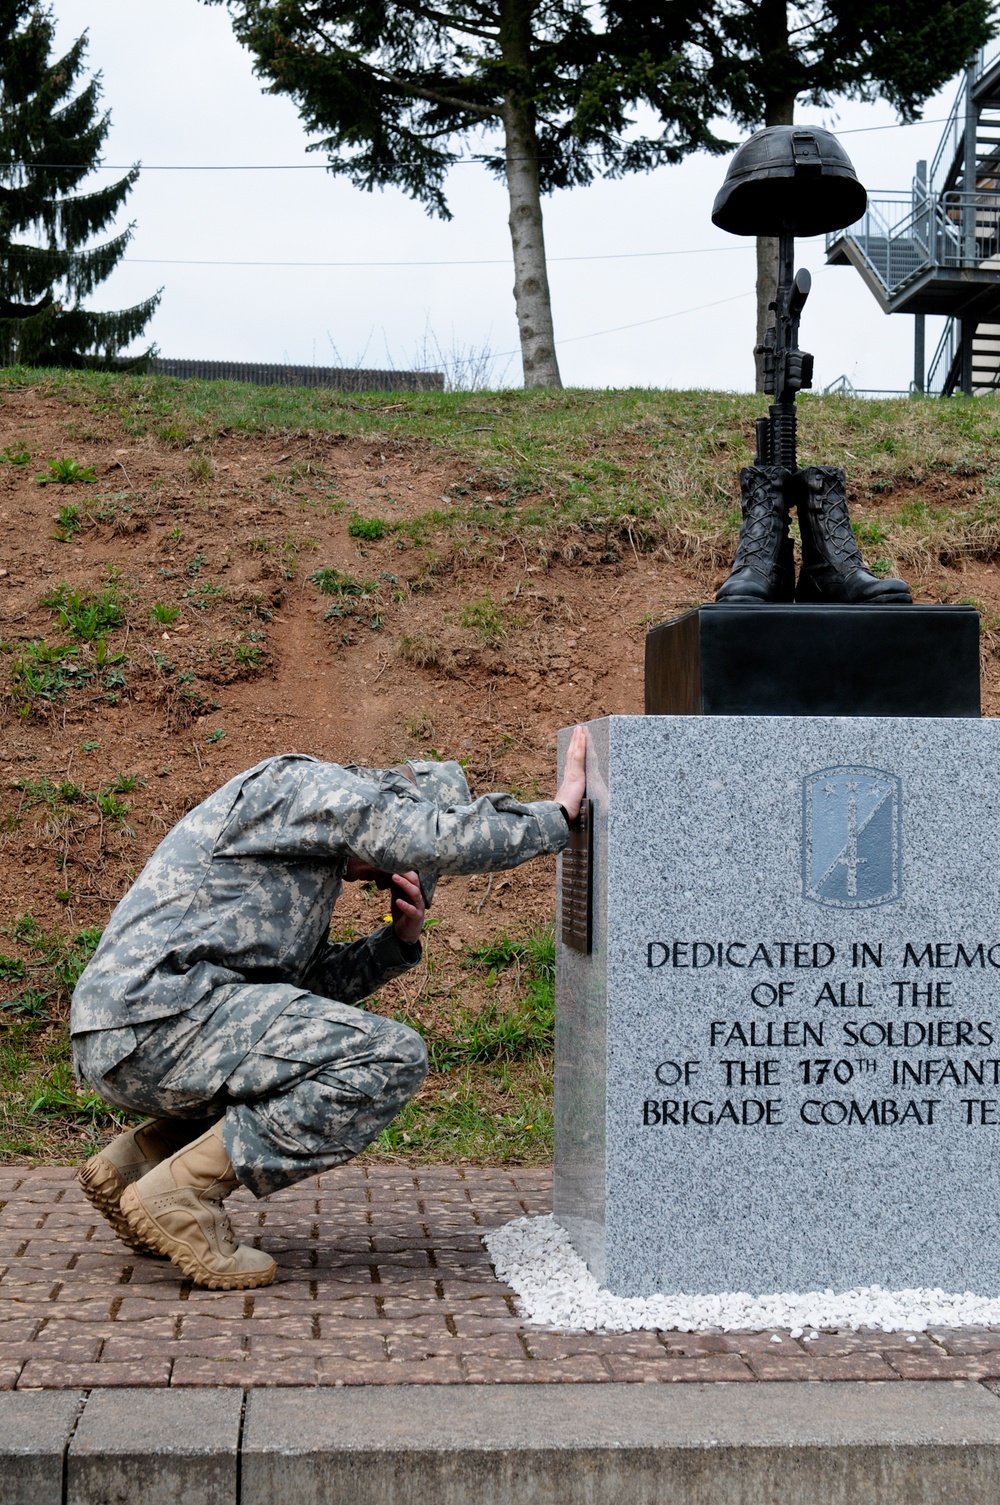 Bayonet soldiers resume mission, remember fallen